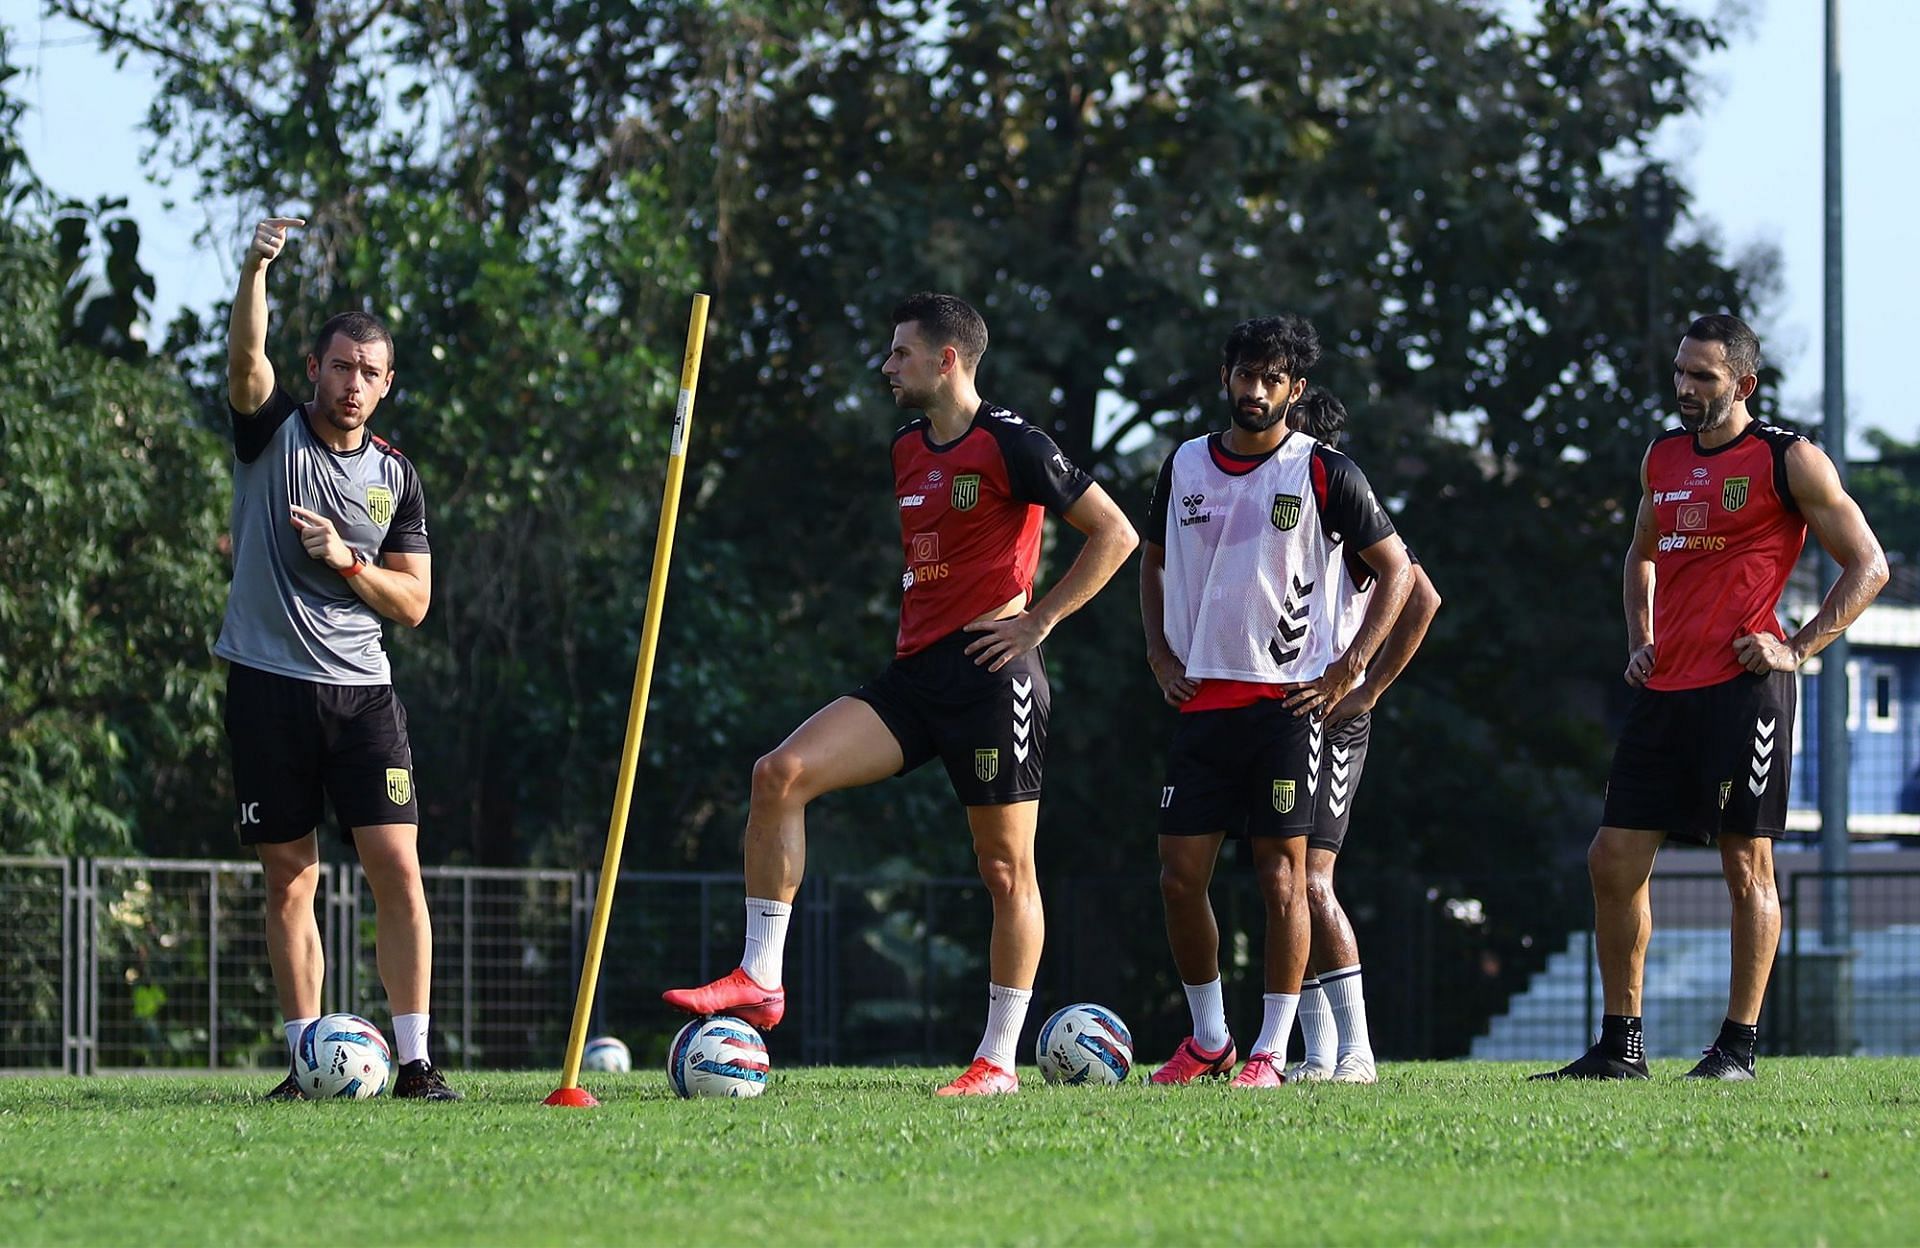 Hyderabad FC players Joel Chianese, Nikhil Poojary and Joao Victor in a training session (Image Courtesy: Hyderabad FC Media)